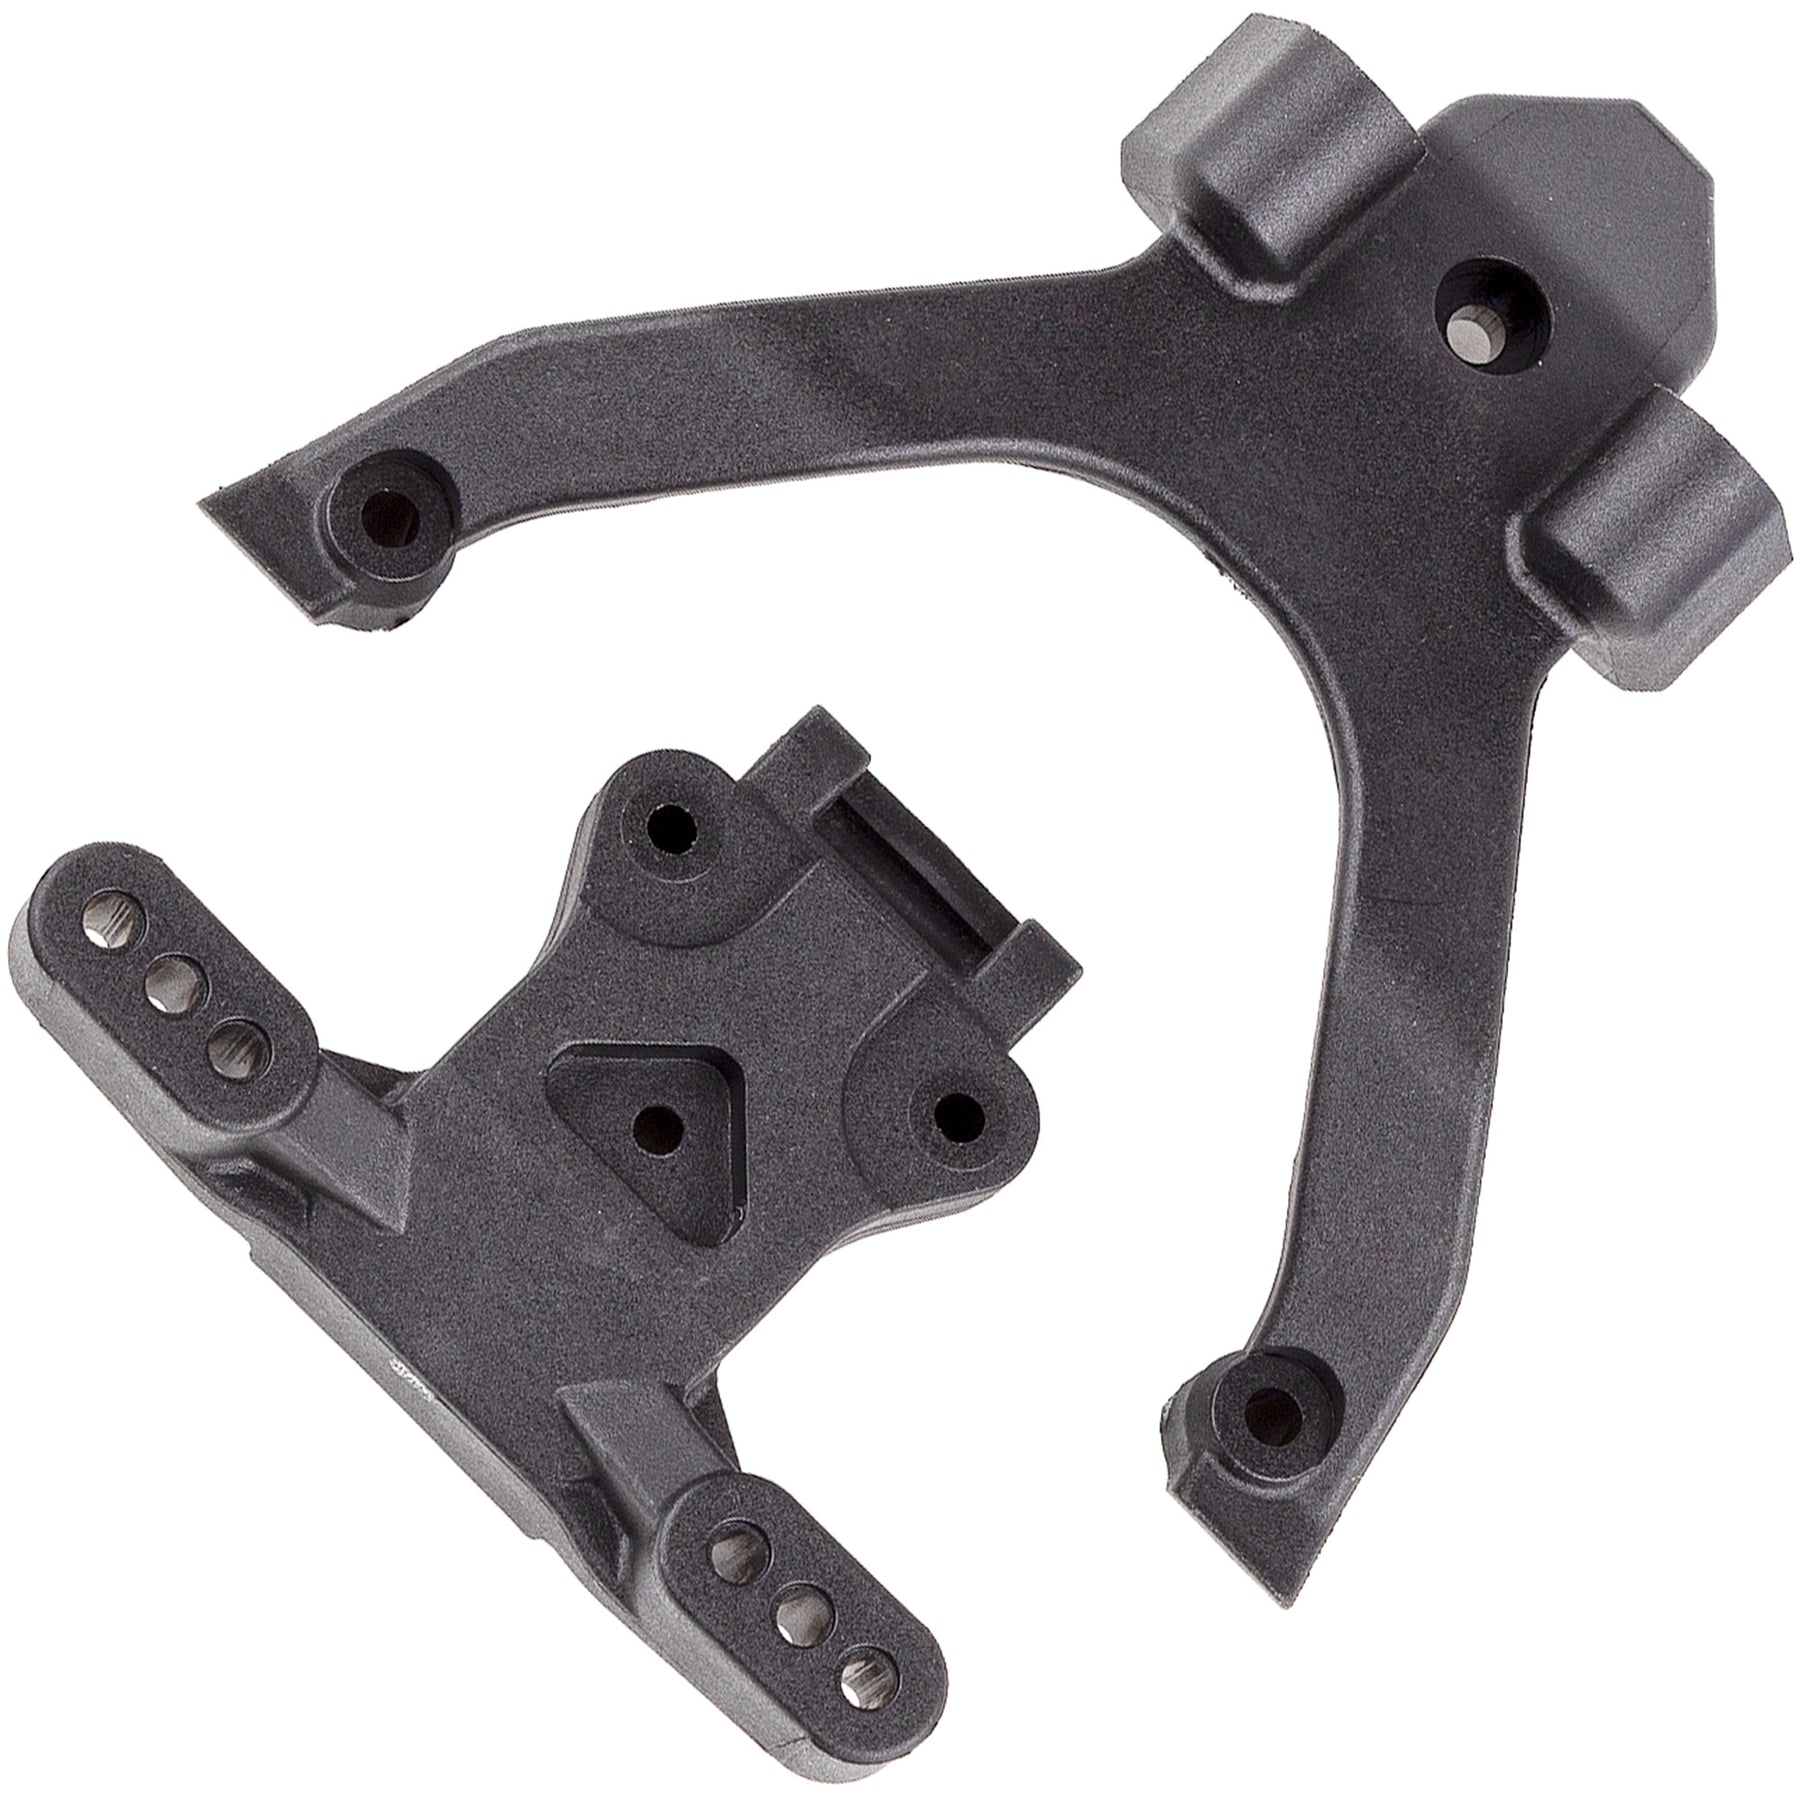 FT RC10B7 Carbon Top Plate and Ball Stud Mount